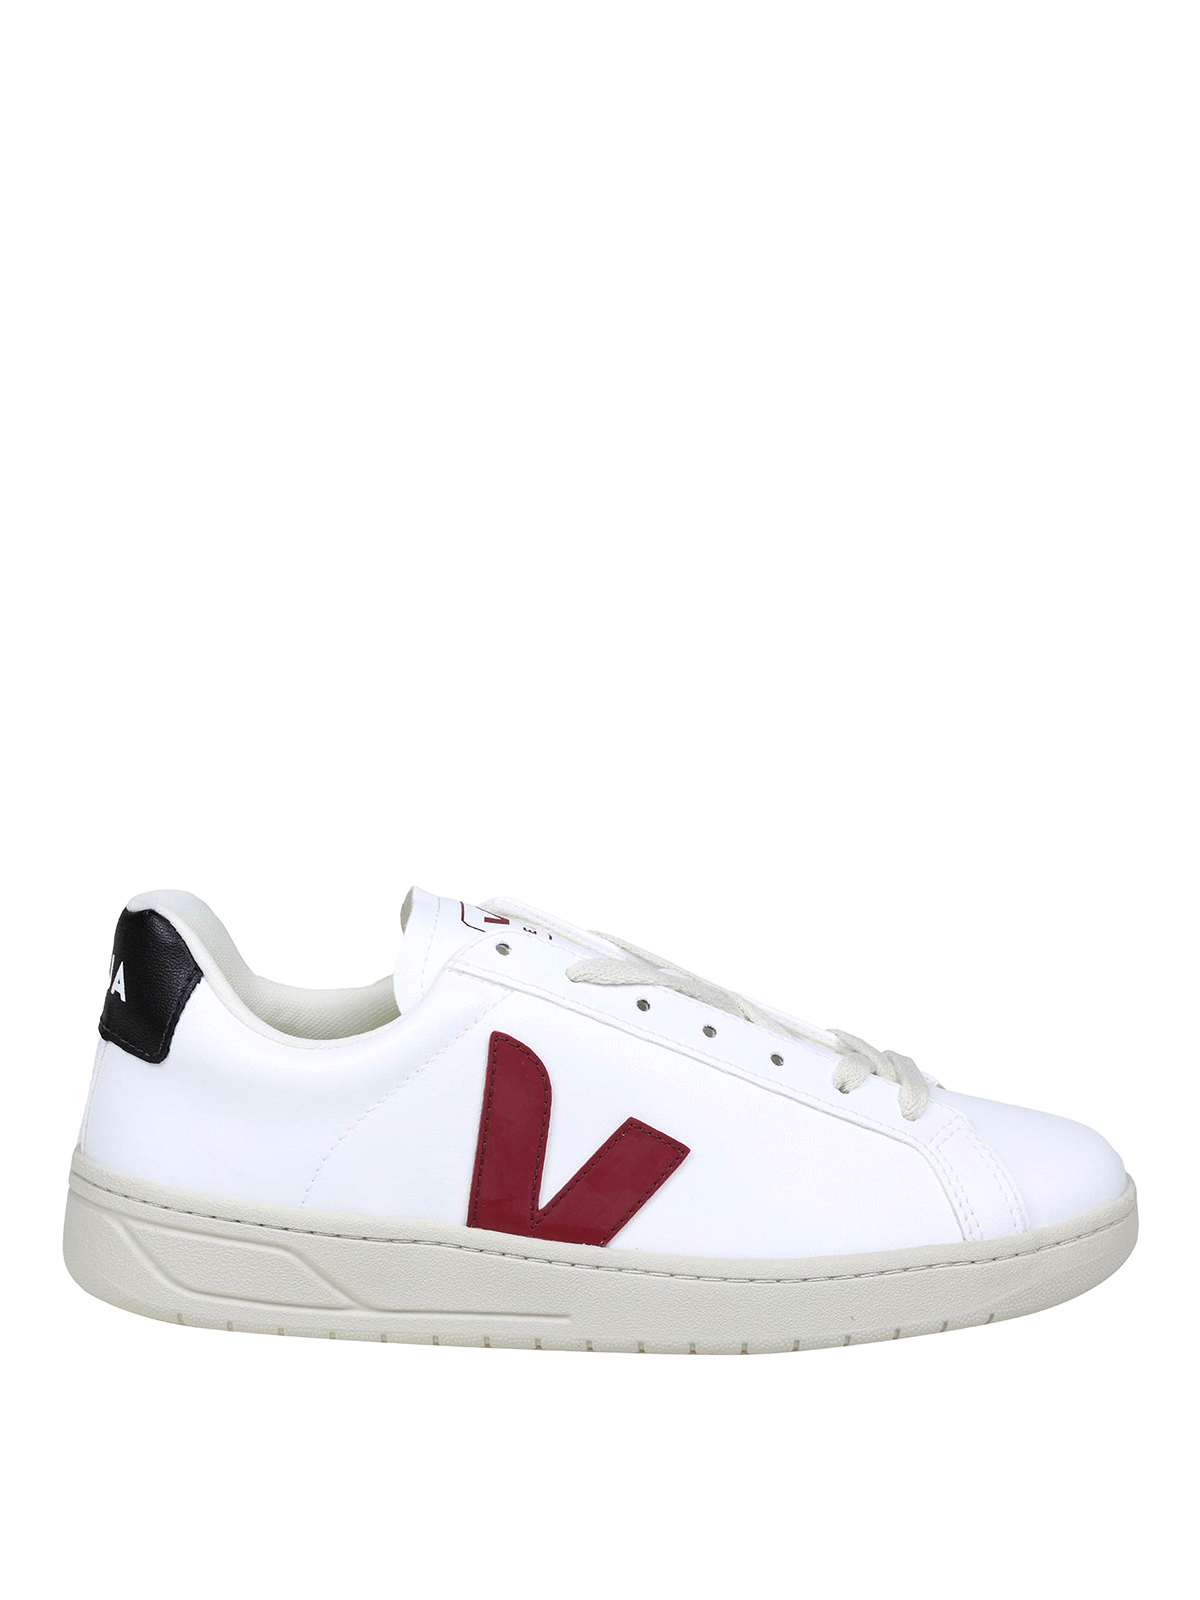 Shop Veja Urca Leather Sneakers In White